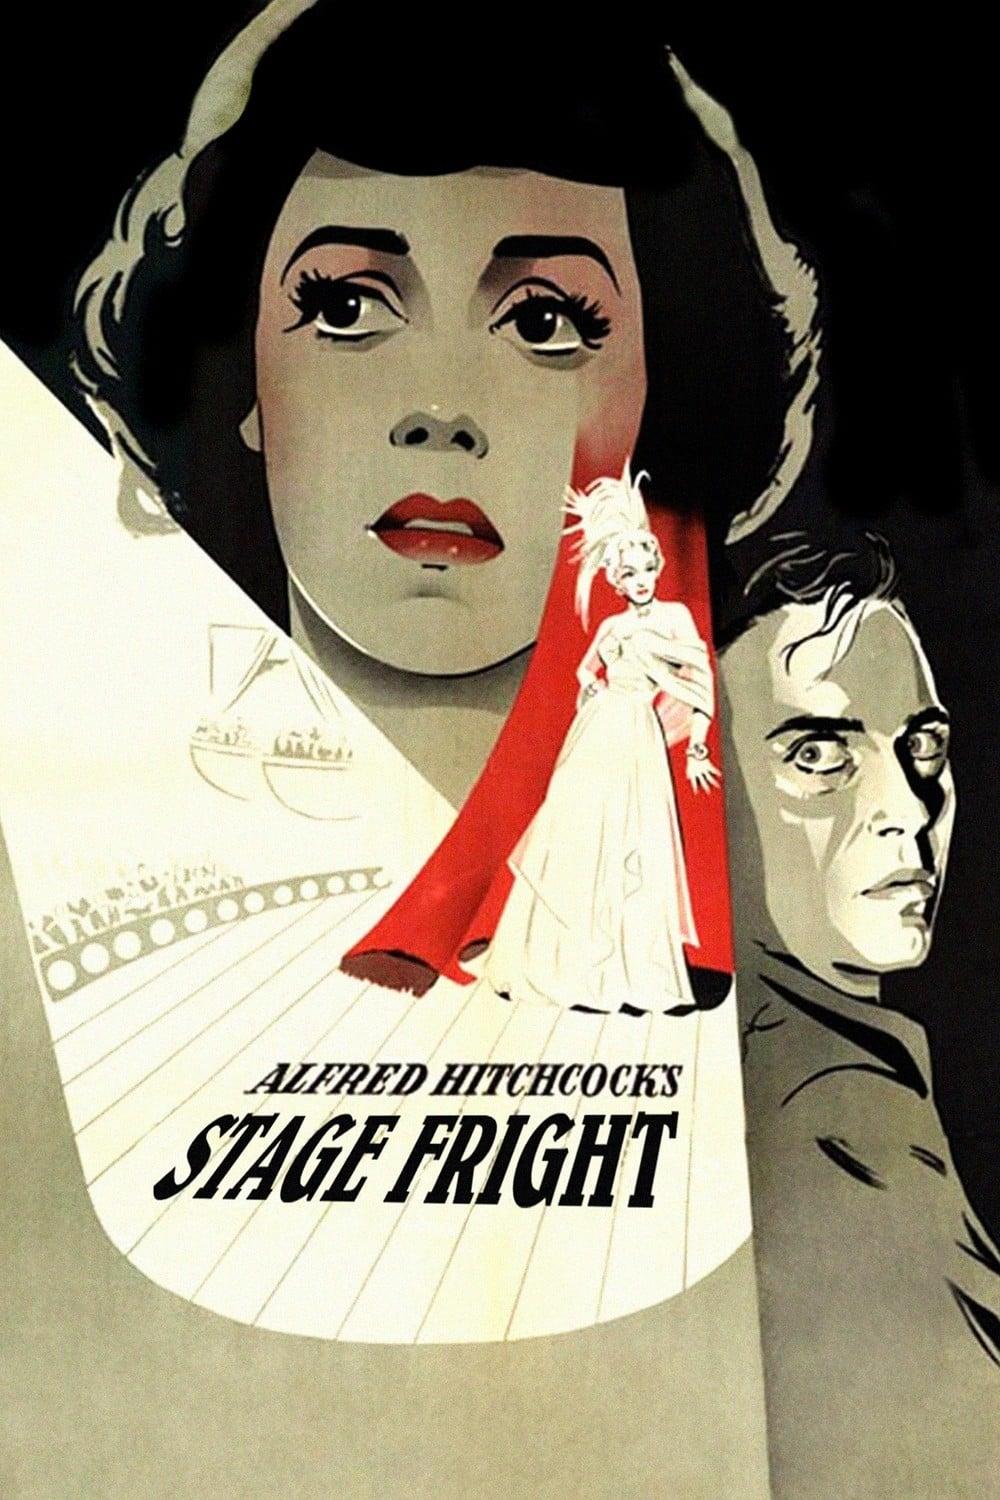 Stage Fright poster